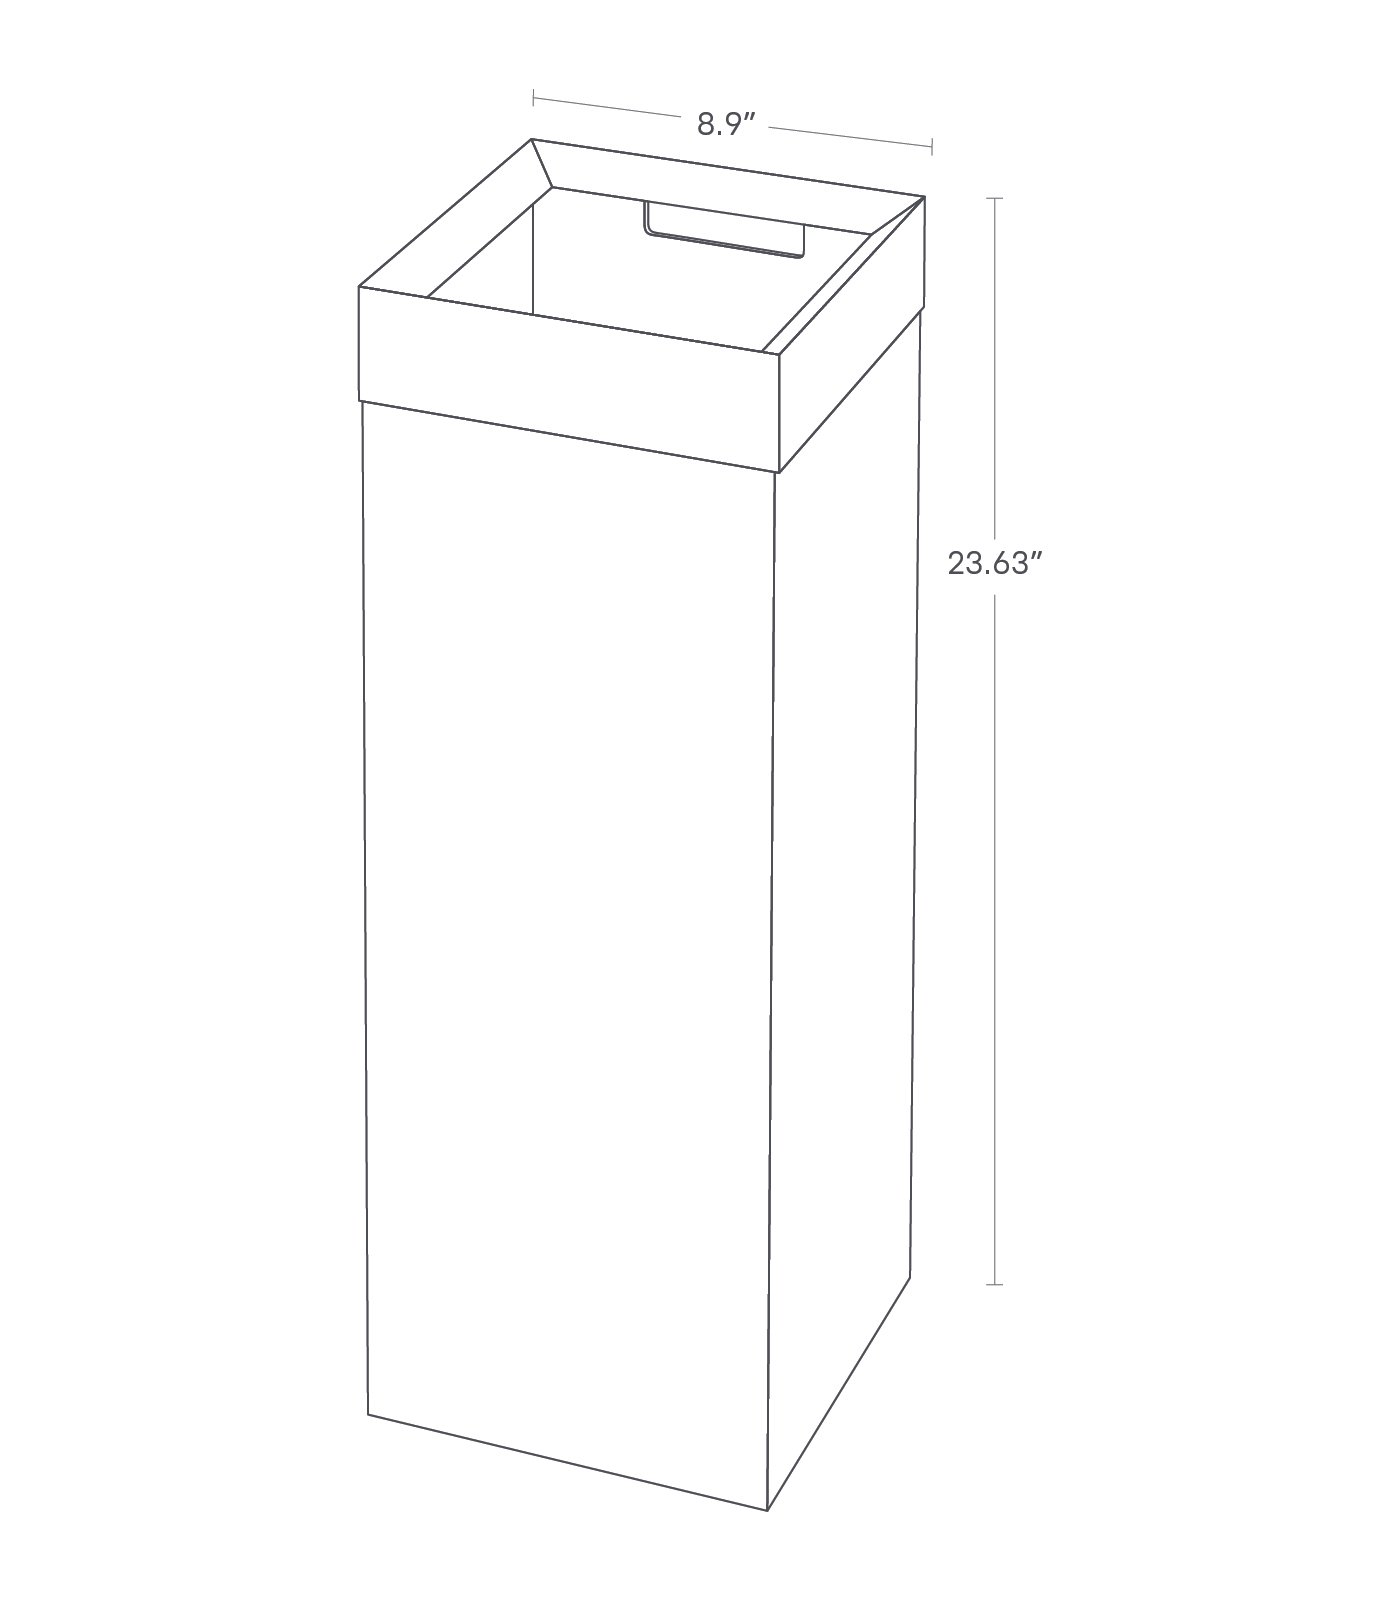 Dimension image for Trash Can showing a total height of 23.63